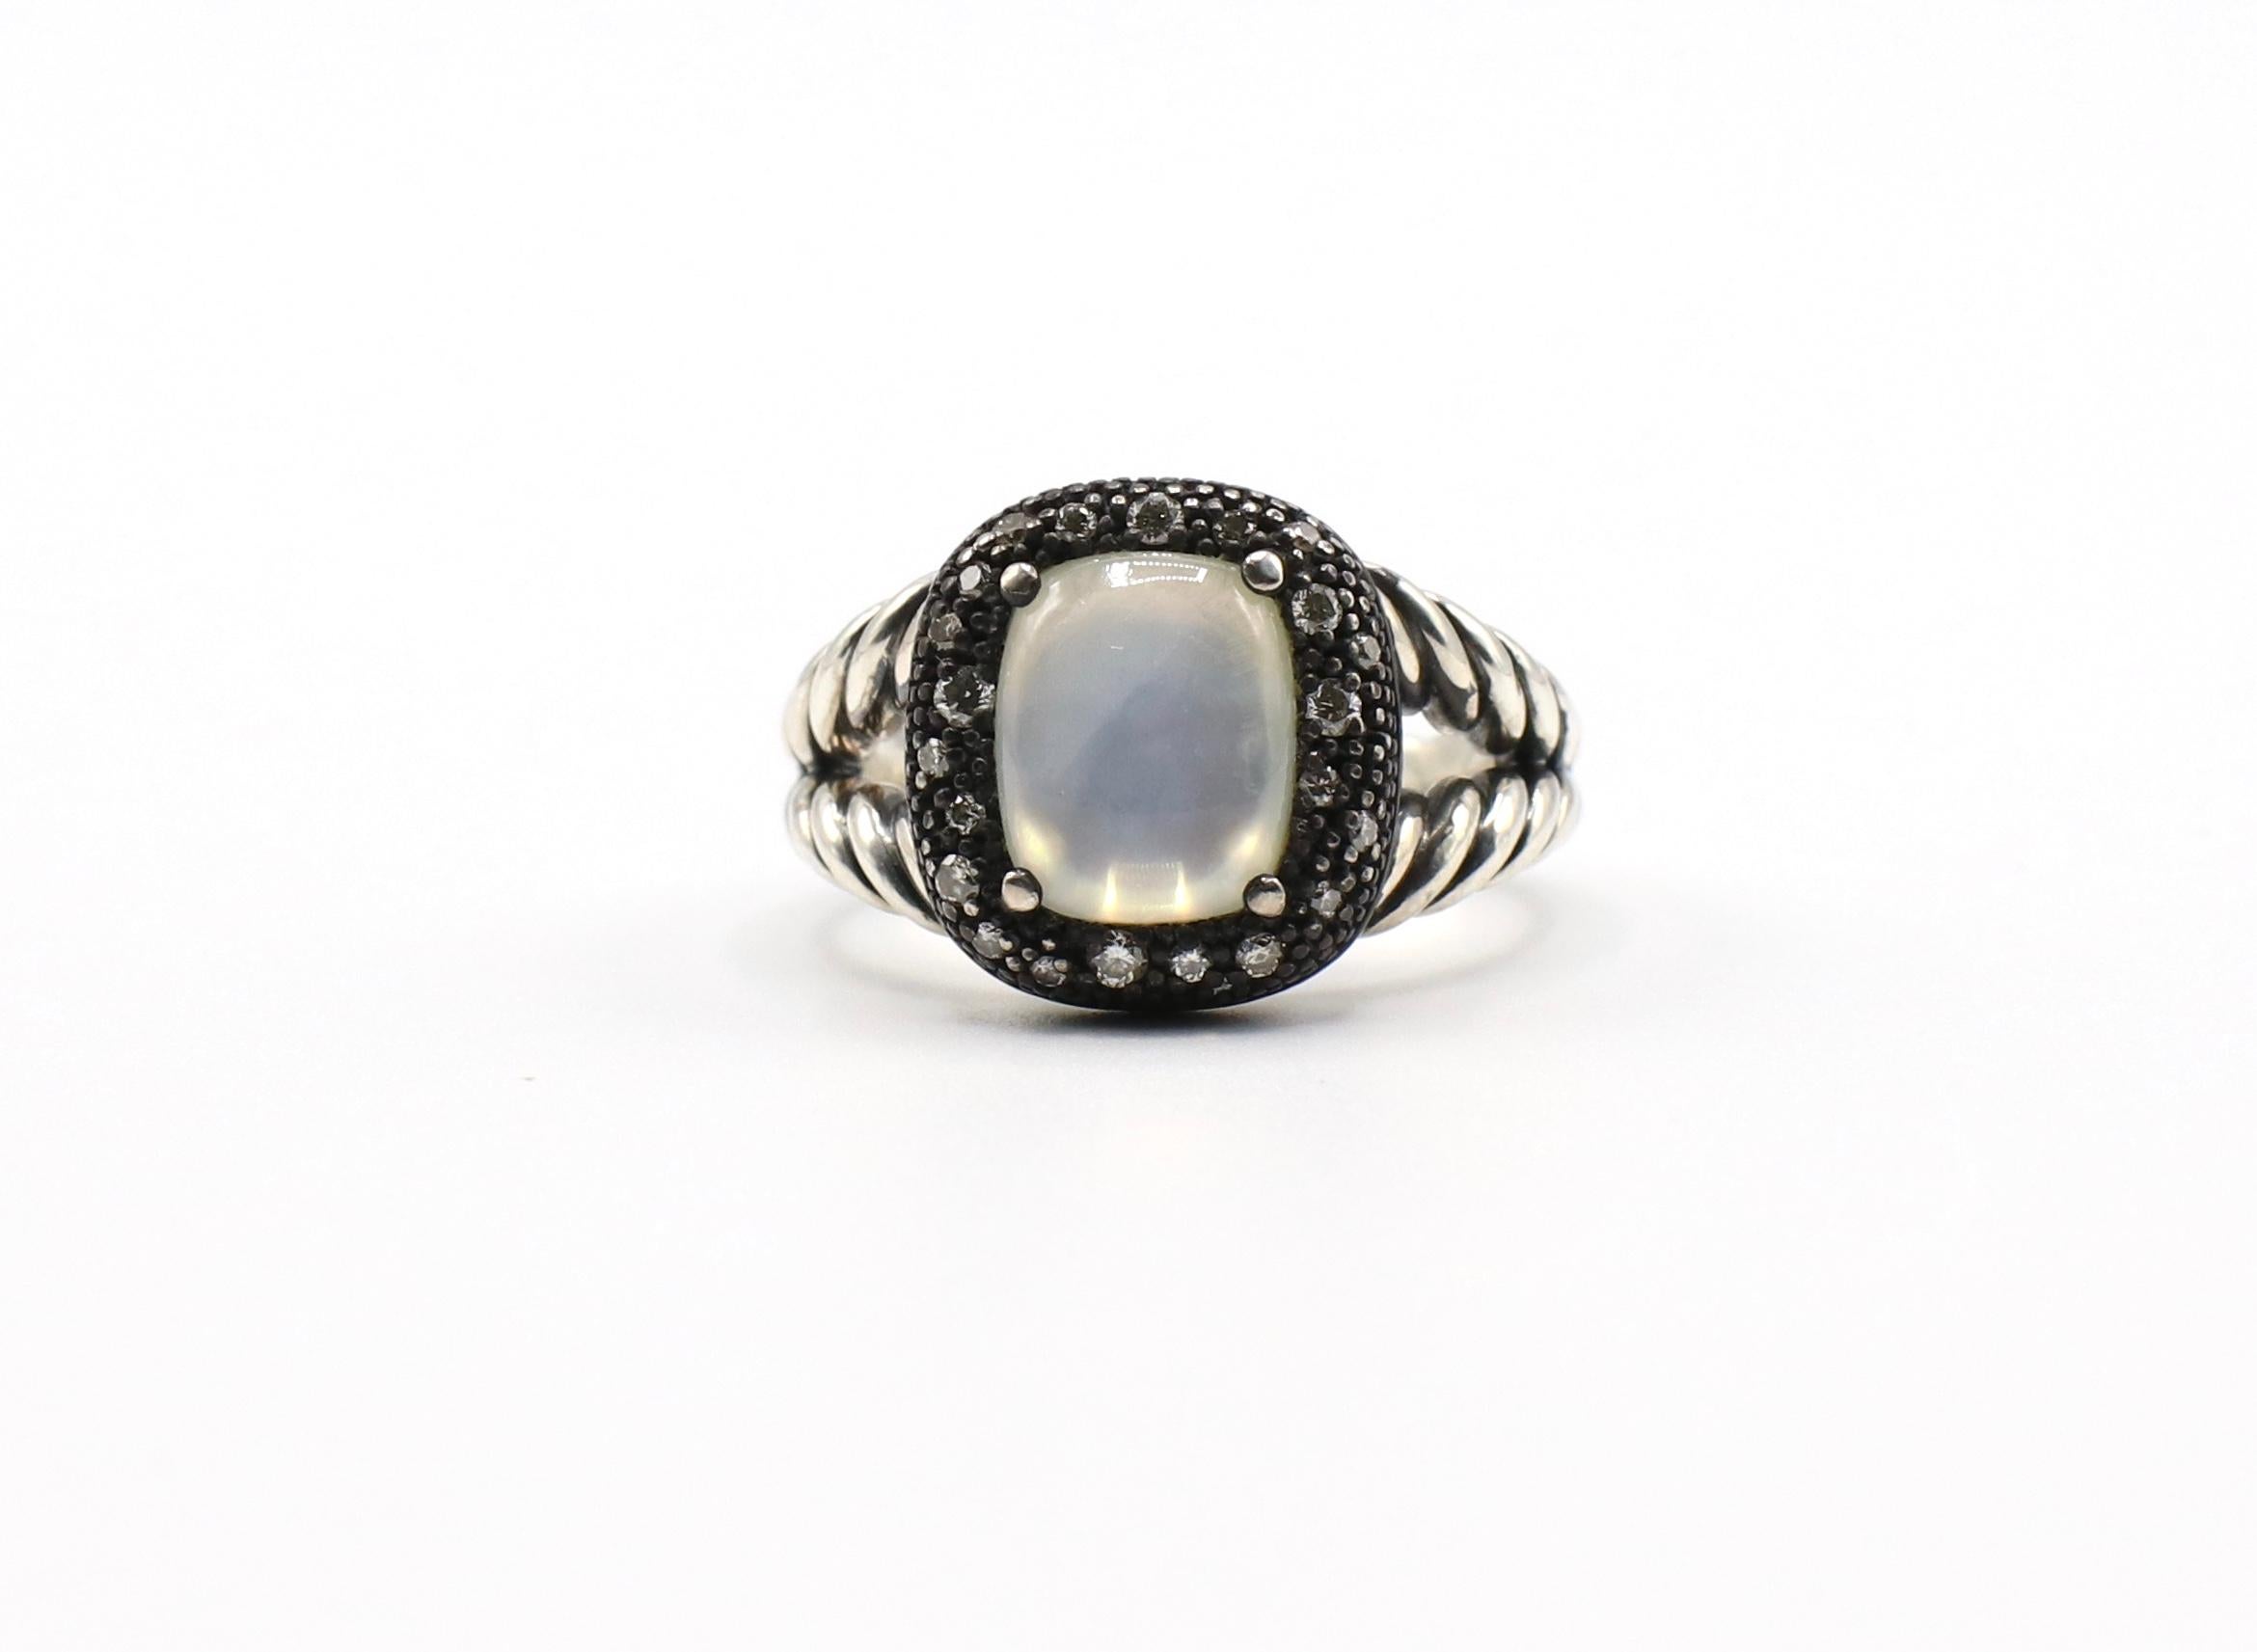 David Yurman Metallic Midnight Mélange Moonstone Sterling Silver Diamond 0.20 CTW Cable Ring Size 7.75

Metal: Sterling Silver 925
Weight: 8.25 grams
Pave diamonds measure approx. 0.20 ctw G-H VS
Ring measures approx. 15mm x 13mm at widest and